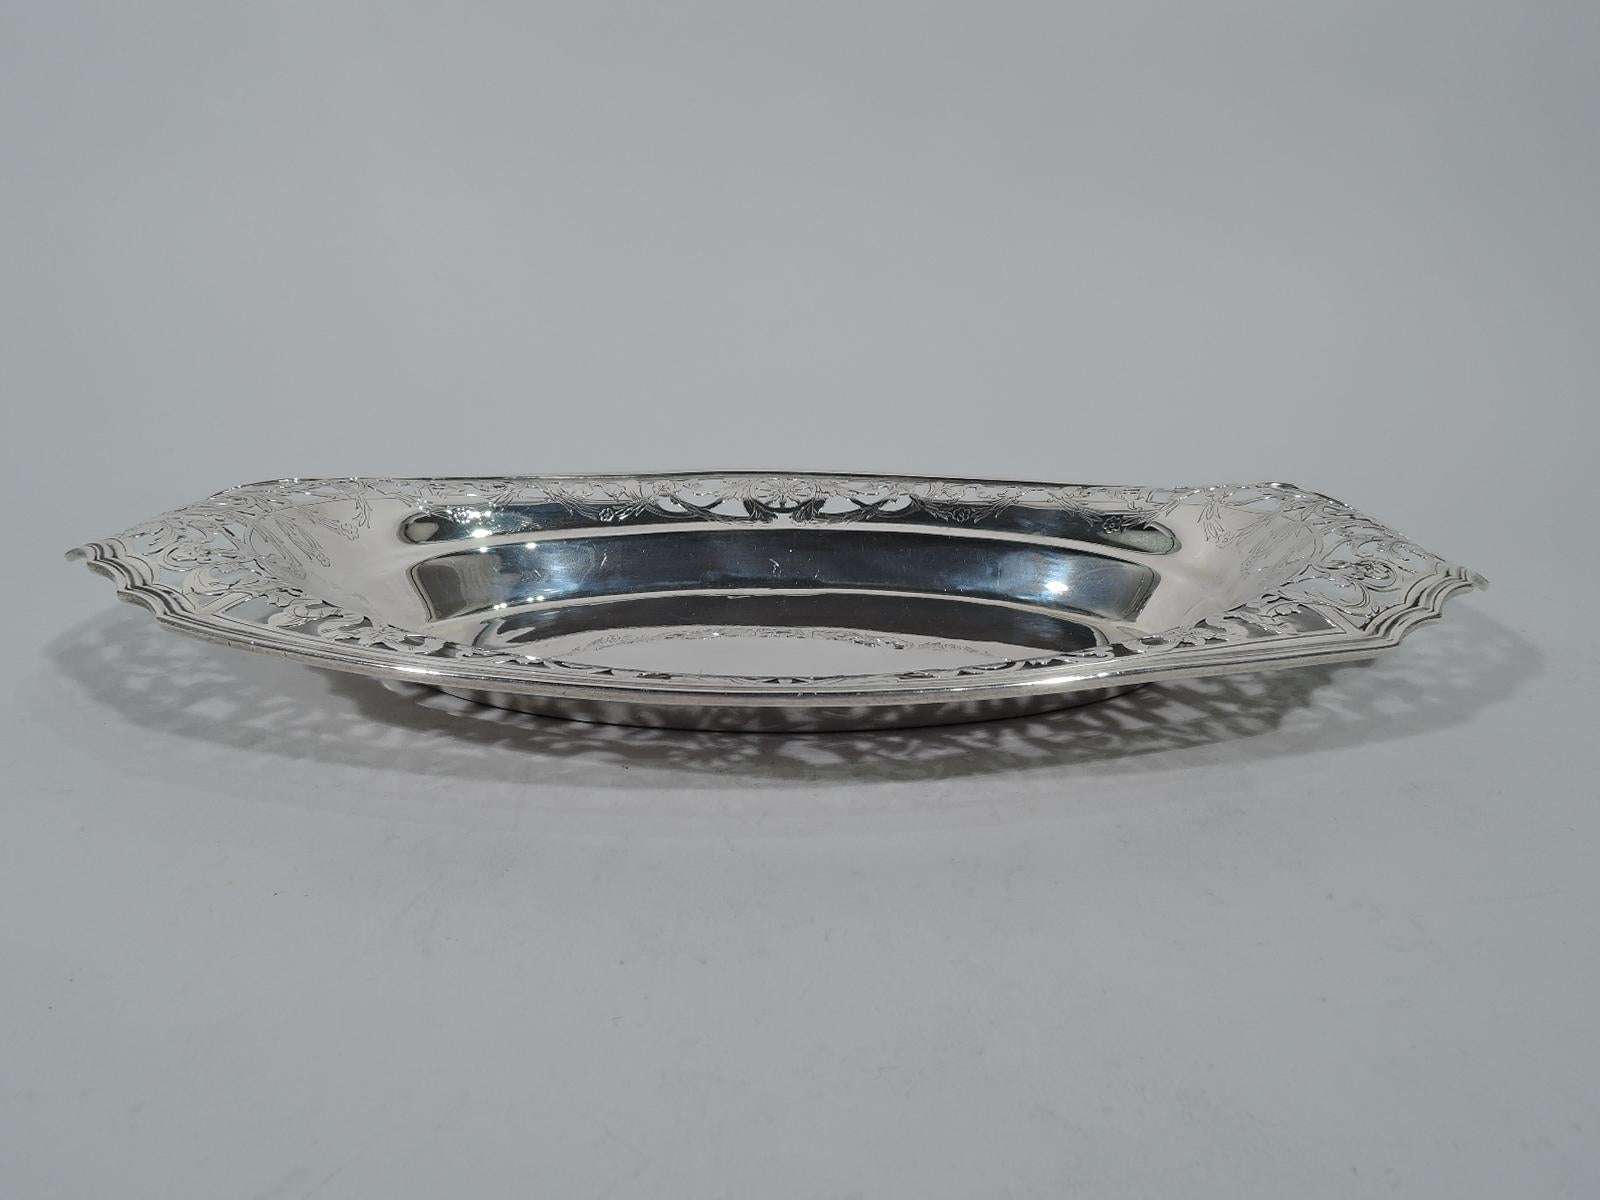 Edwardian sterling silver bread tray. Made by Reed & Barton in Taunton, mass, solid oval well bordered by pierced scrolls, ribbon, flowers, and paterae. Shaped and molded rim. Hallmark includes pattern no. 339AE. Measures: Weight 11.8 troy ounces.